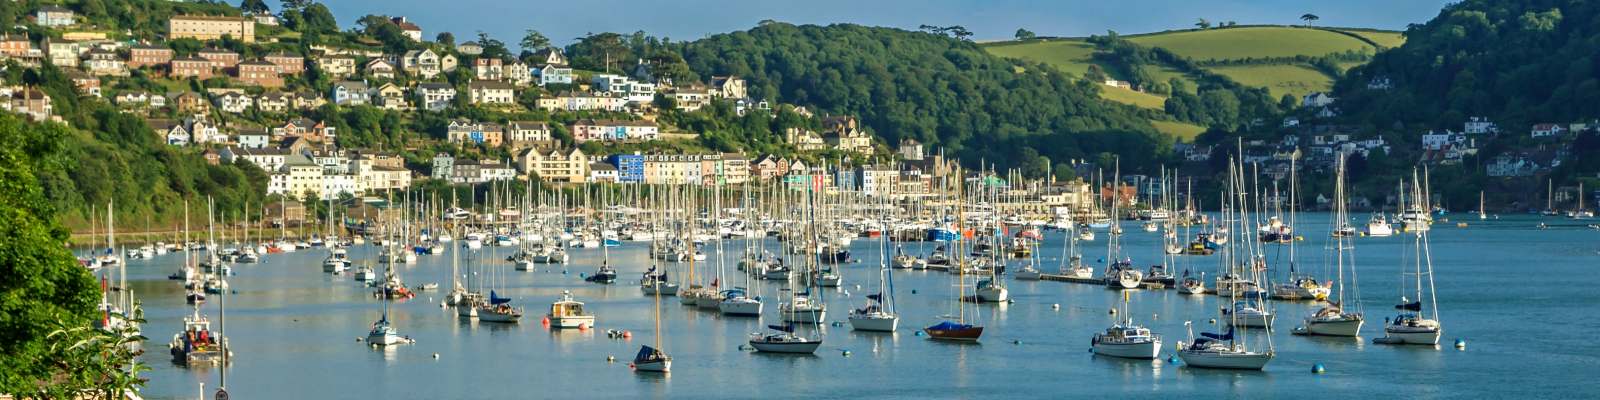 Holiday Cottages In Dartmouth To Rent Self Catering Dartmouth